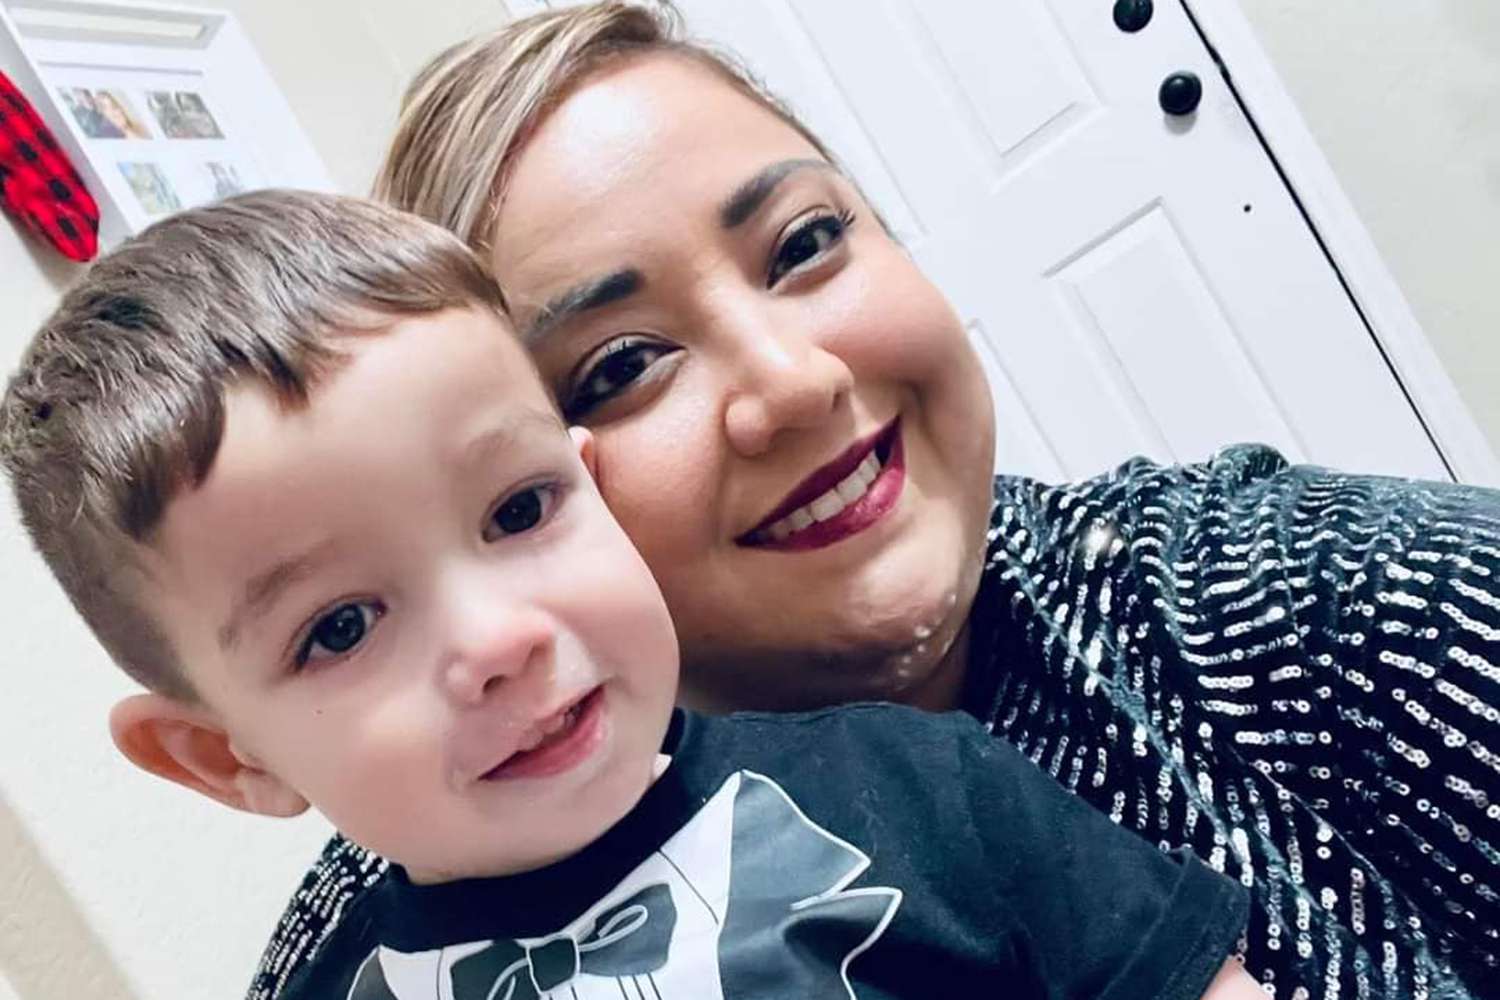 Savannah Kriger, 32, shot her son Kaiden, 3, before ultimately turning a gun on herself in a murder-suicide that happened in San Antonio, Texas